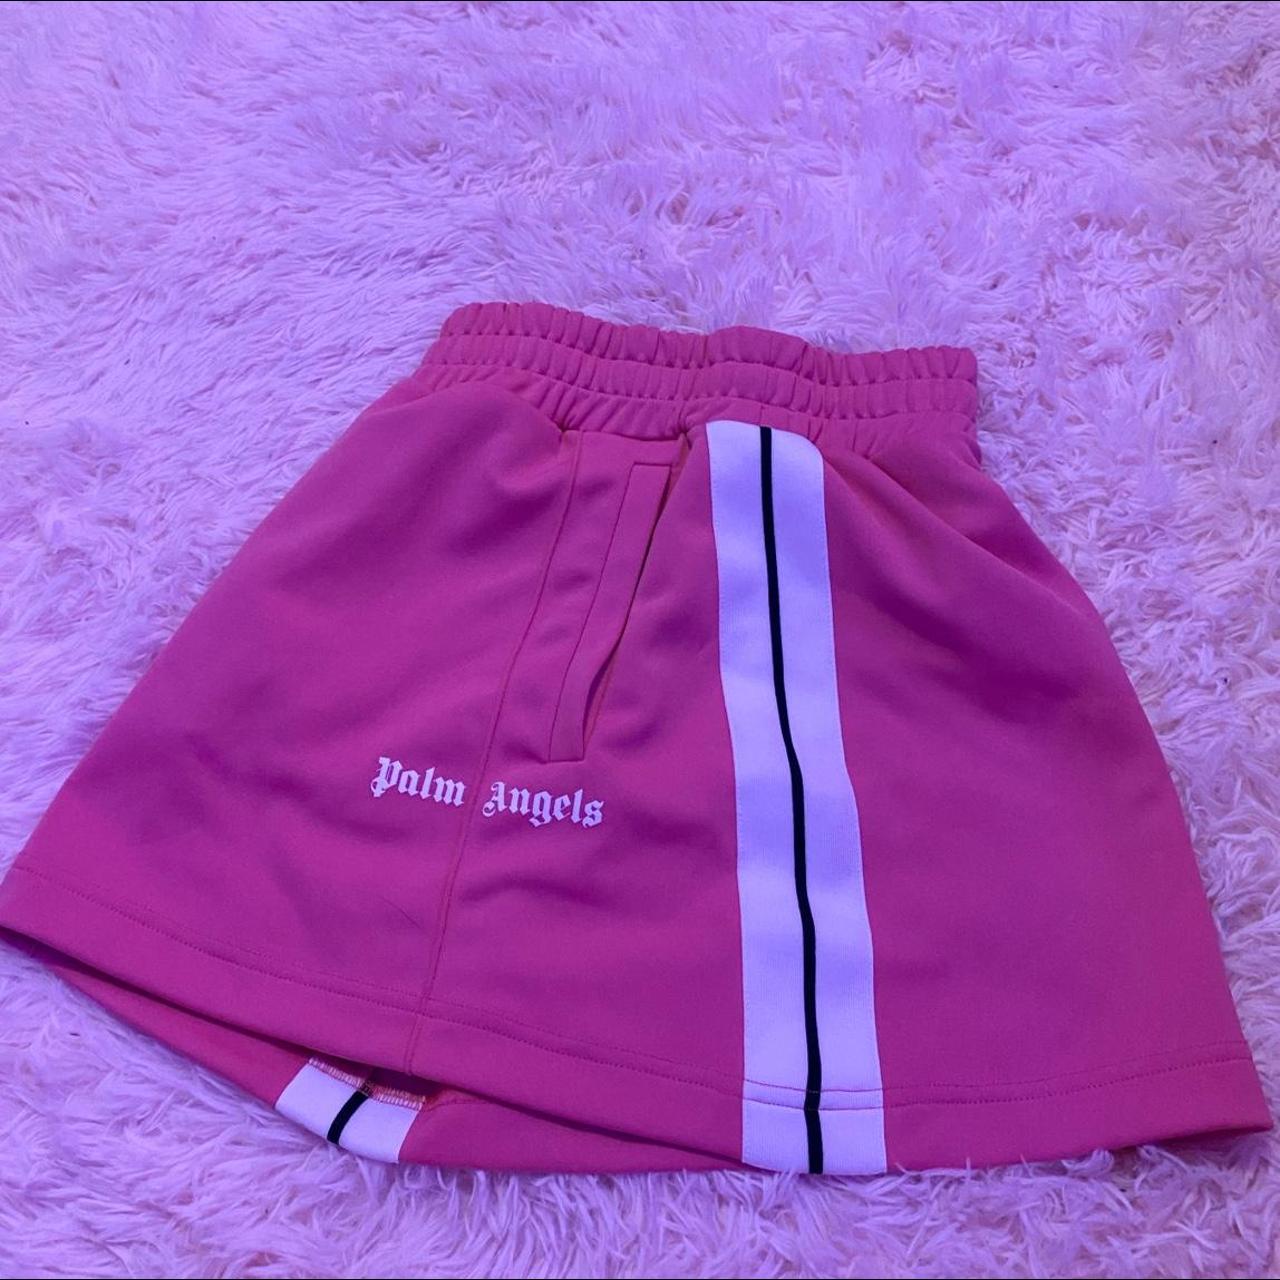 Palm Angels Women's Pink and White Skirt (3)